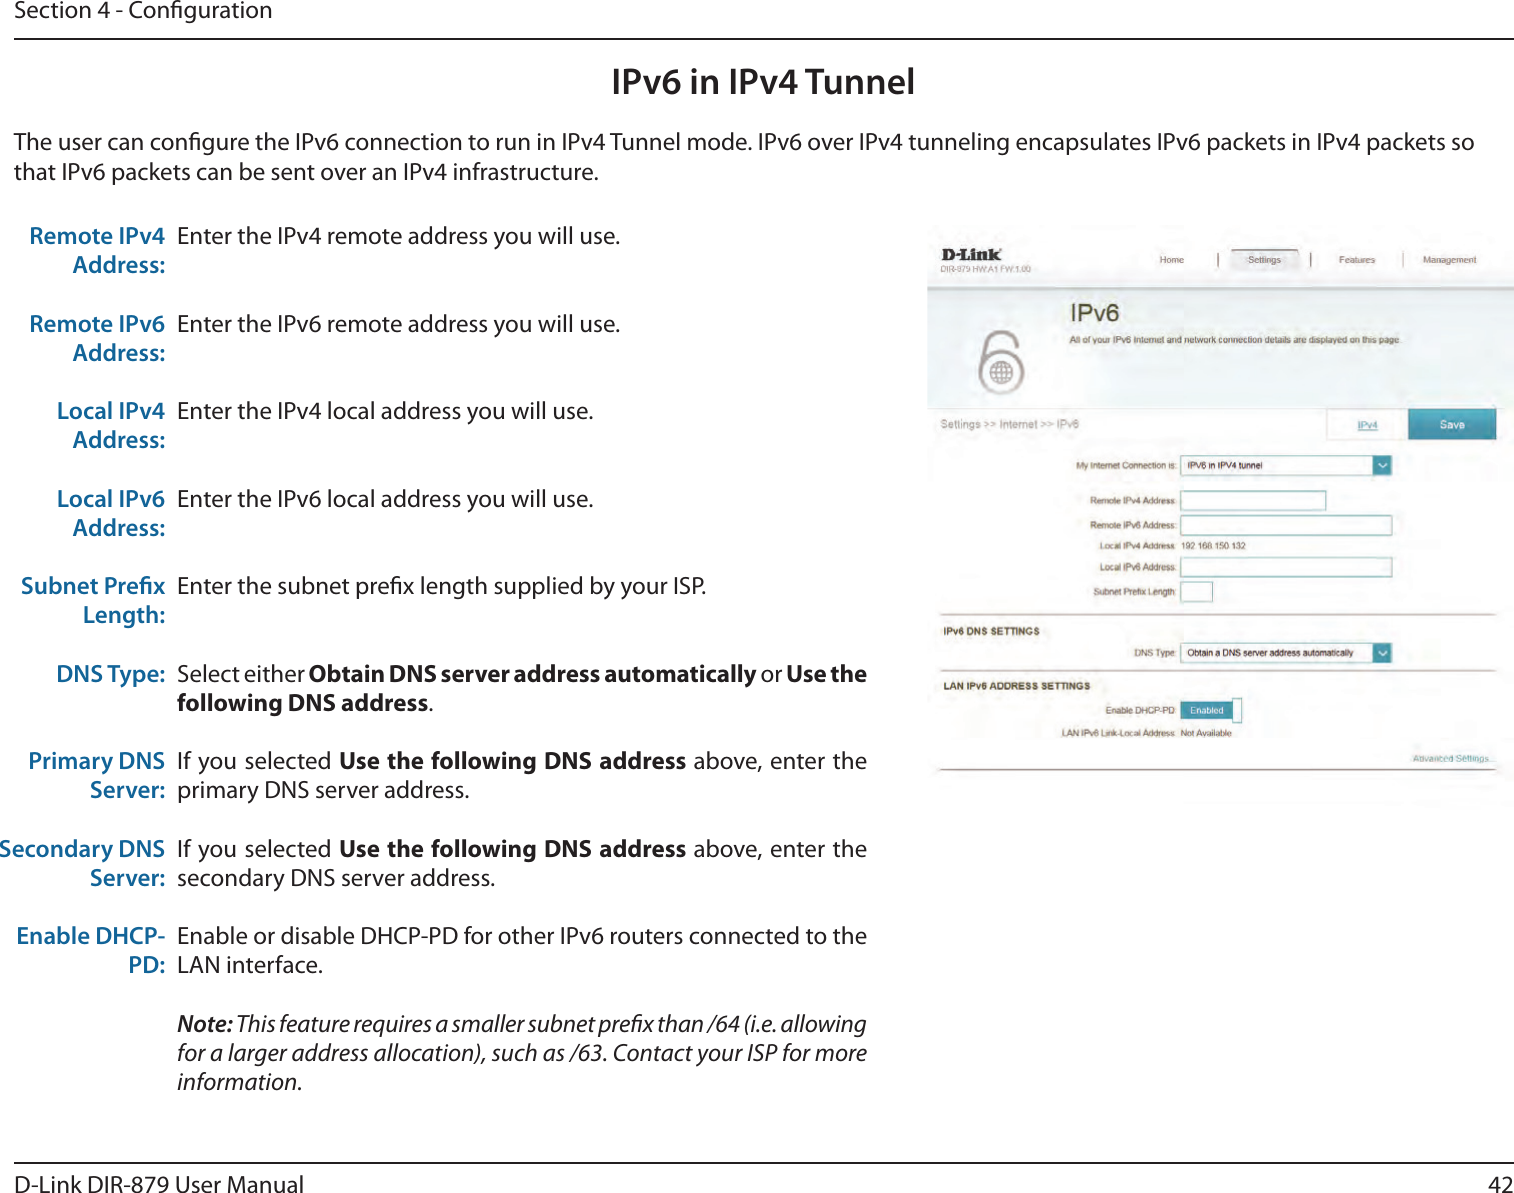 42D-Link DIR-879 User ManualSection 4 - CongurationIPv6 in IPv4 TunnelEnter the IPv4 remote address you will use.Enter the IPv6 remote address you will use.Enter the IPv4 local address you will use.Enter the IPv6 local address you will use.Enter the subnet prex length supplied by your ISP.Select either Obtain DNS server address automatically or Use the following DNS address.If you selected Use the following DNS address above, enter the primary DNS server address. If you selected Use the following DNS address above, enter the secondary DNS server address.Enable or disable DHCP-PD for other IPv6 routers connected to the LAN interface.Note: This feature requires a smaller subnet prex than /64 (i.e. allowing for a larger address allocation), such as /63. Contact your ISP for more information.Remote IPv4 Address:Remote IPv6 Address:Local IPv4 Address:Local IPv6 Address:Subnet Prex Length:DNS Type:Primary DNS Server:Secondary DNS Server:Enable DHCP-PD:The user can congure the IPv6 connection to run in IPv4 Tunnel mode. IPv6 over IPv4 tunneling encapsulates IPv6 packets in IPv4 packets so that IPv6 packets can be sent over an IPv4 infrastructure.